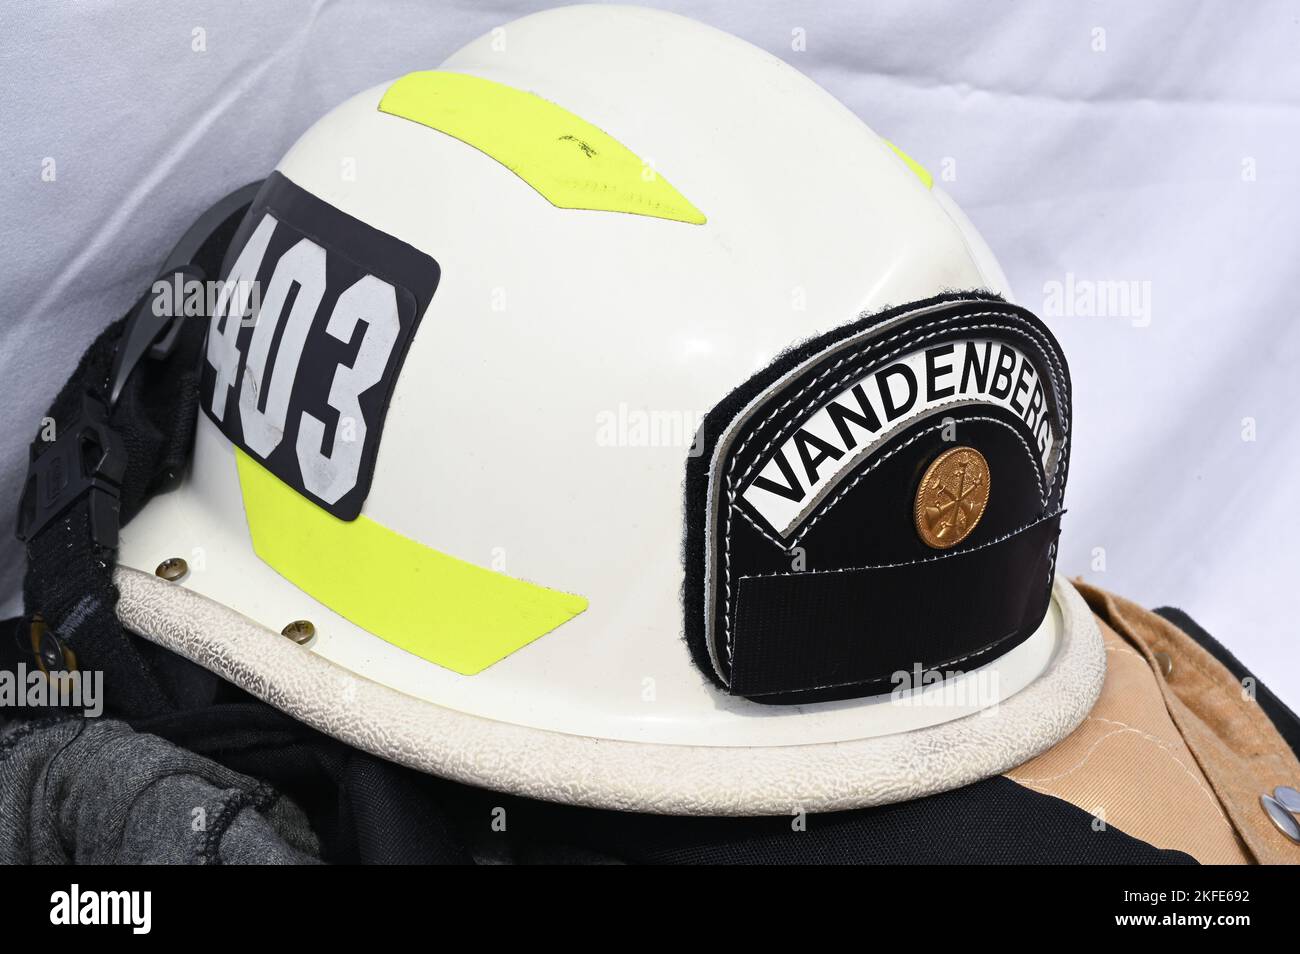 A firefighter’s helmet is on display during a 9/11 Remembrance Ceremony at Vandenberg Space Force Base, Calif. Sept. 11, 2022. The ceremony was in remembrance of the and honor of the 343 firefighters, first responders and victims of the attacks on the World Trade Center, Pentagon, and our Nation. Stock Photo